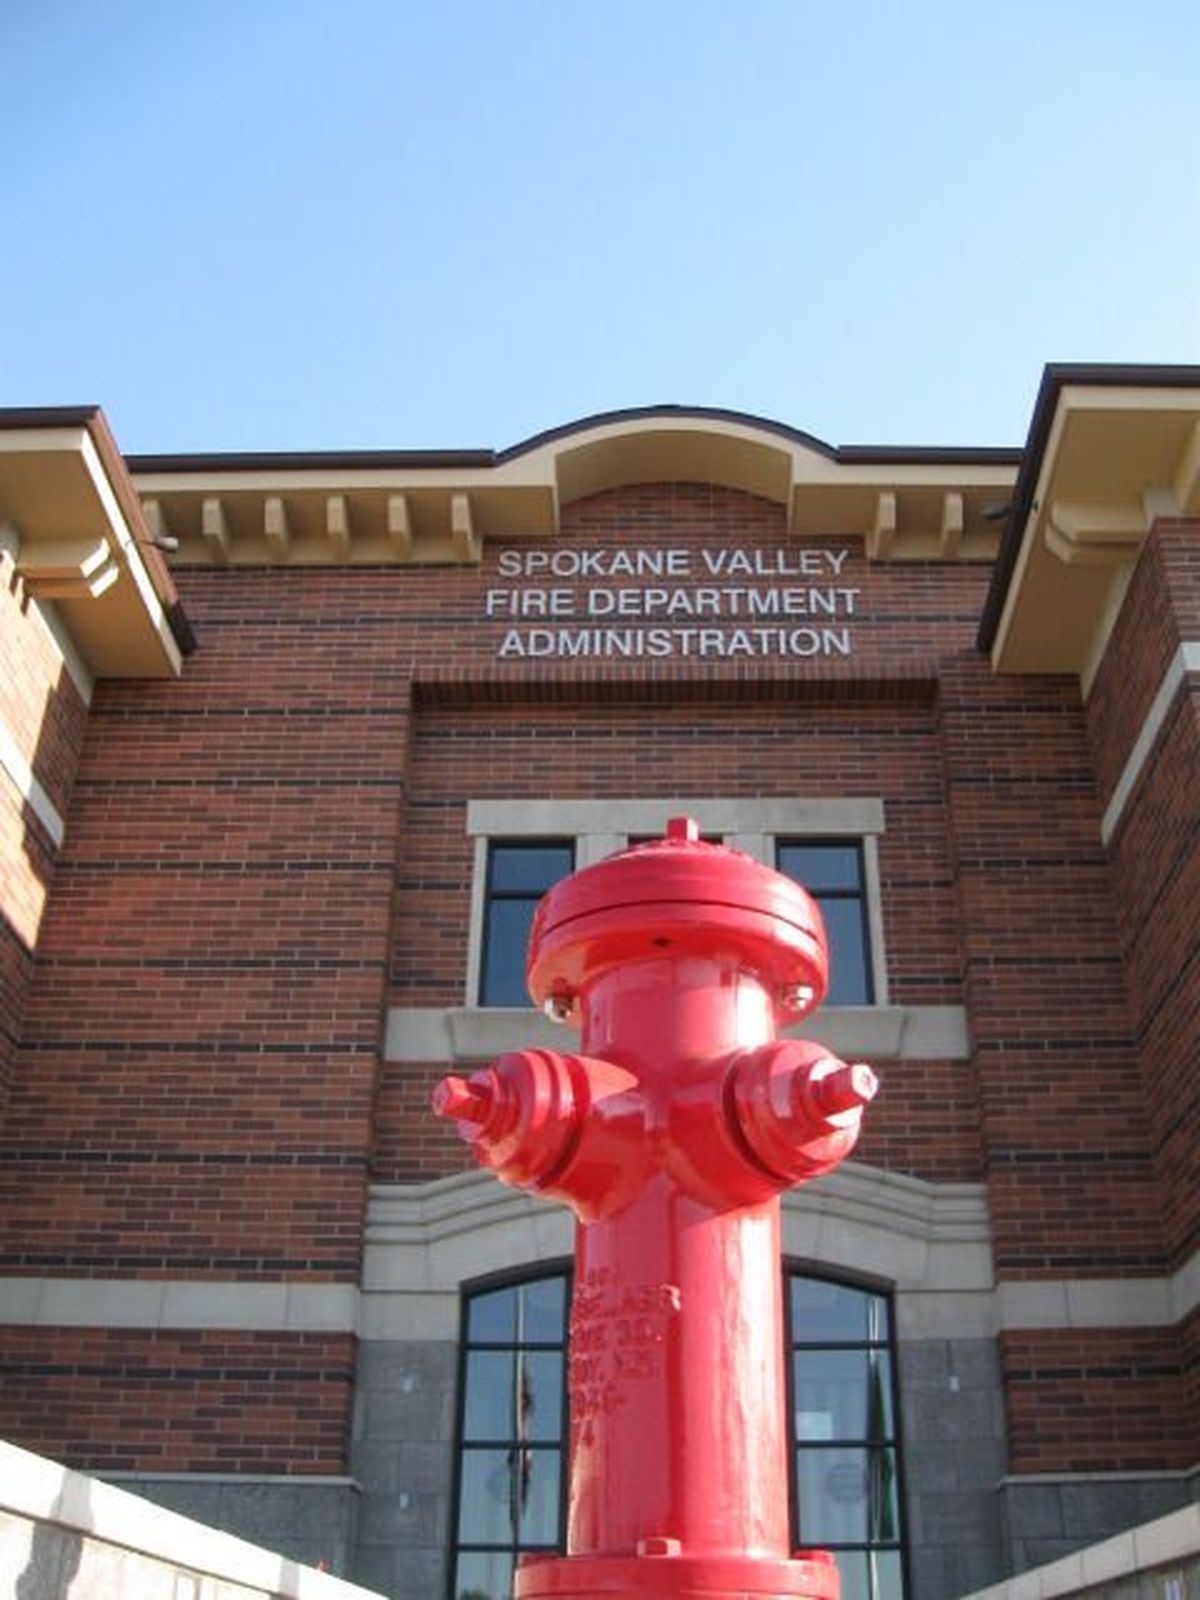 The Spokane Valley Fire Department Administration Building is shown.  (The Spokesman-Review)